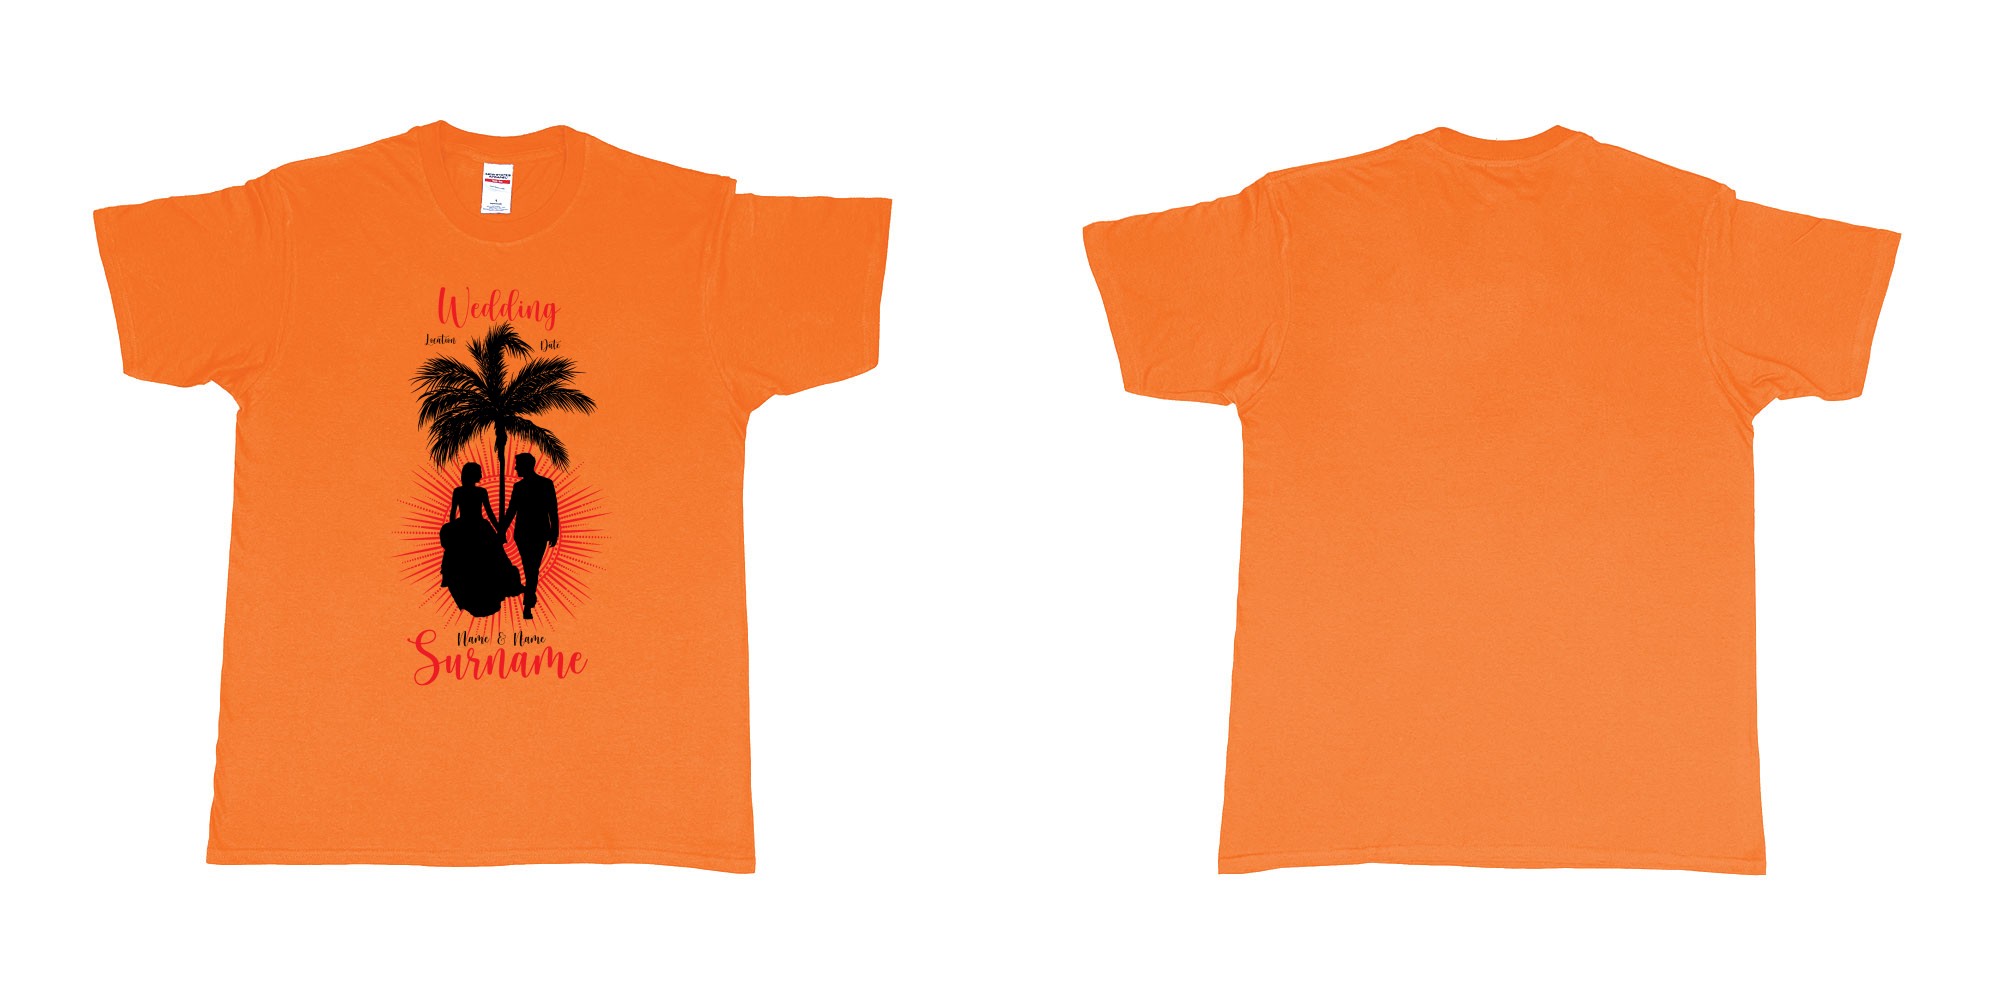 Custom tshirt design wedding palm sun bali in fabric color orange choice your own text made in Bali by The Pirate Way